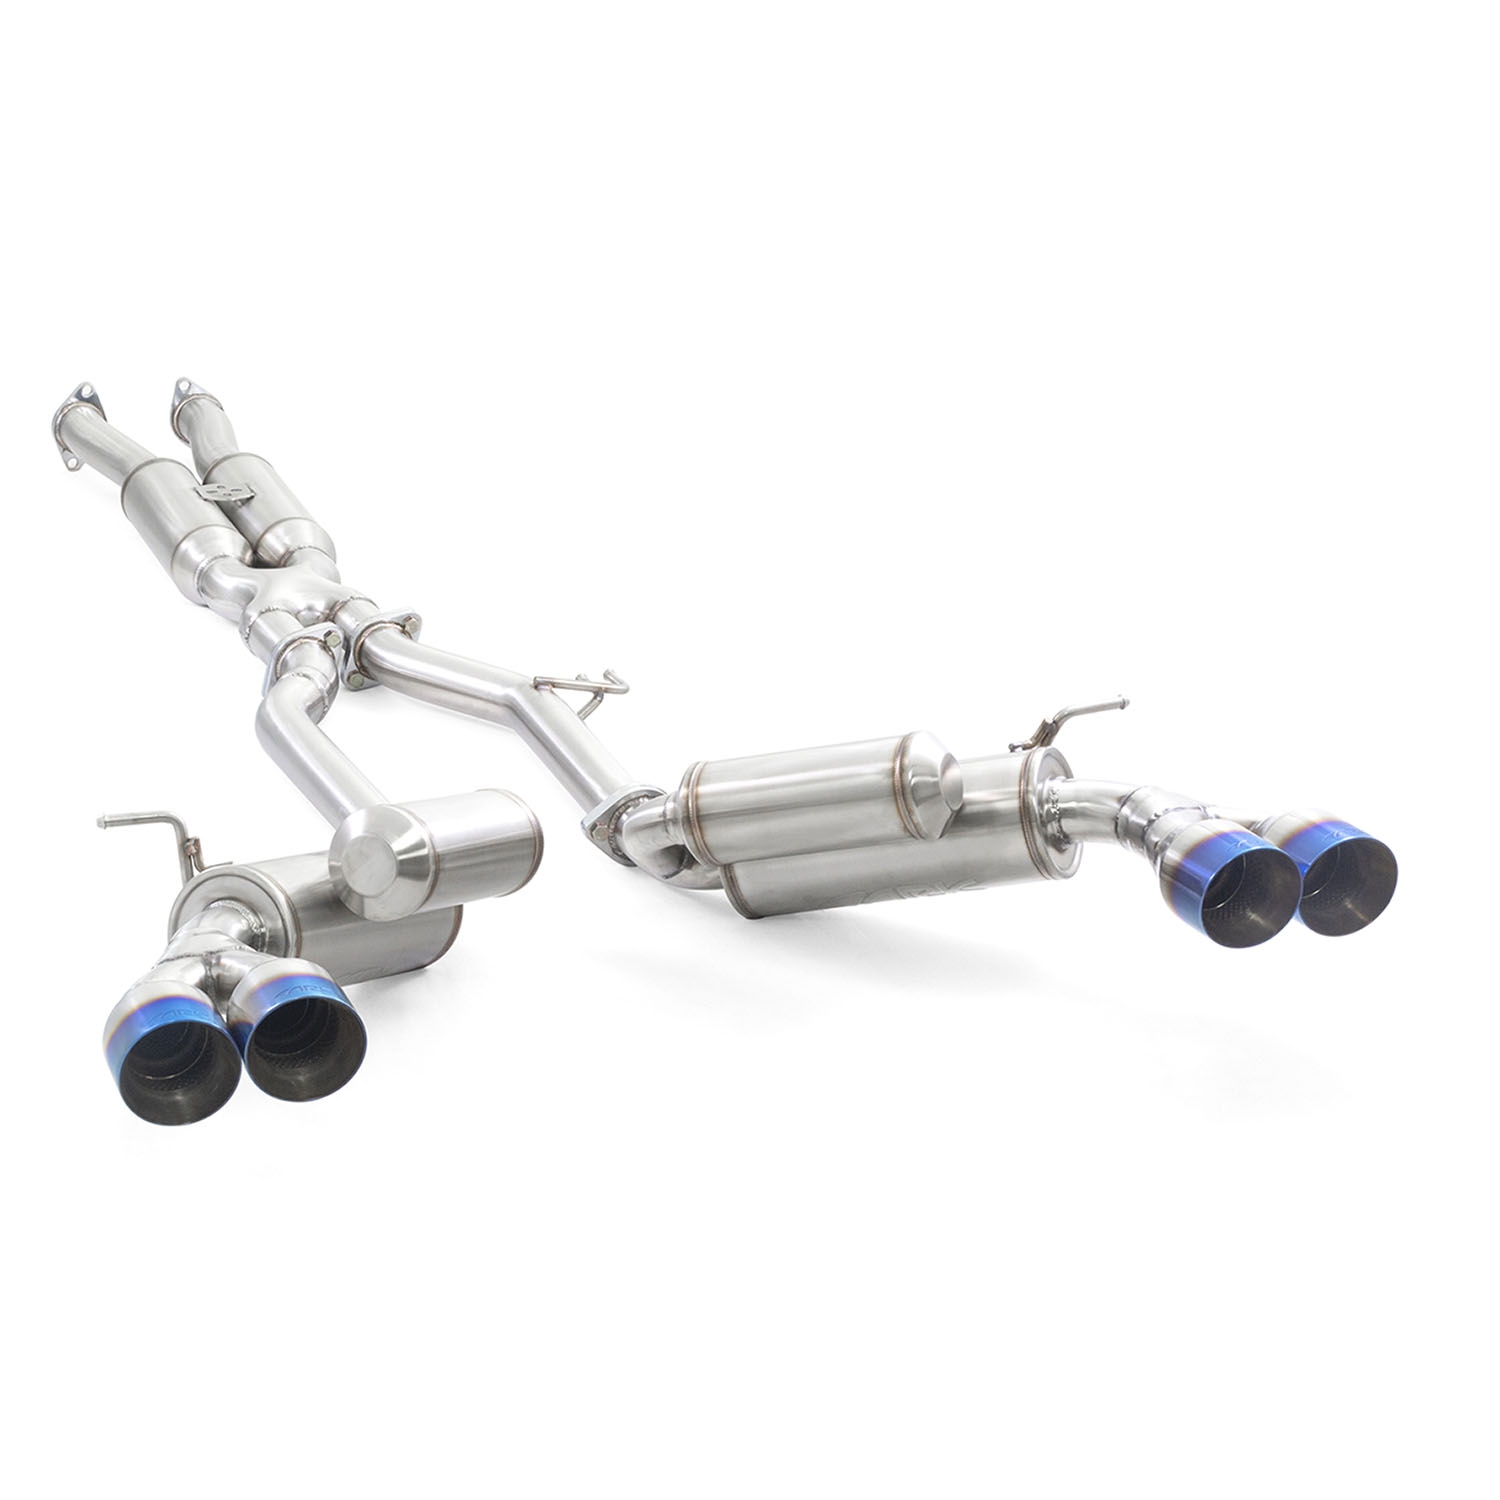 Ark Performance Stainless Steel GRiP Cat-Back Exhaust System 2.5in Pipe w/ 3.5 Burnt Quad Tip , Dual Exit - Hyundai Genesis Coupe 10-16 3.8L BK1, BK2